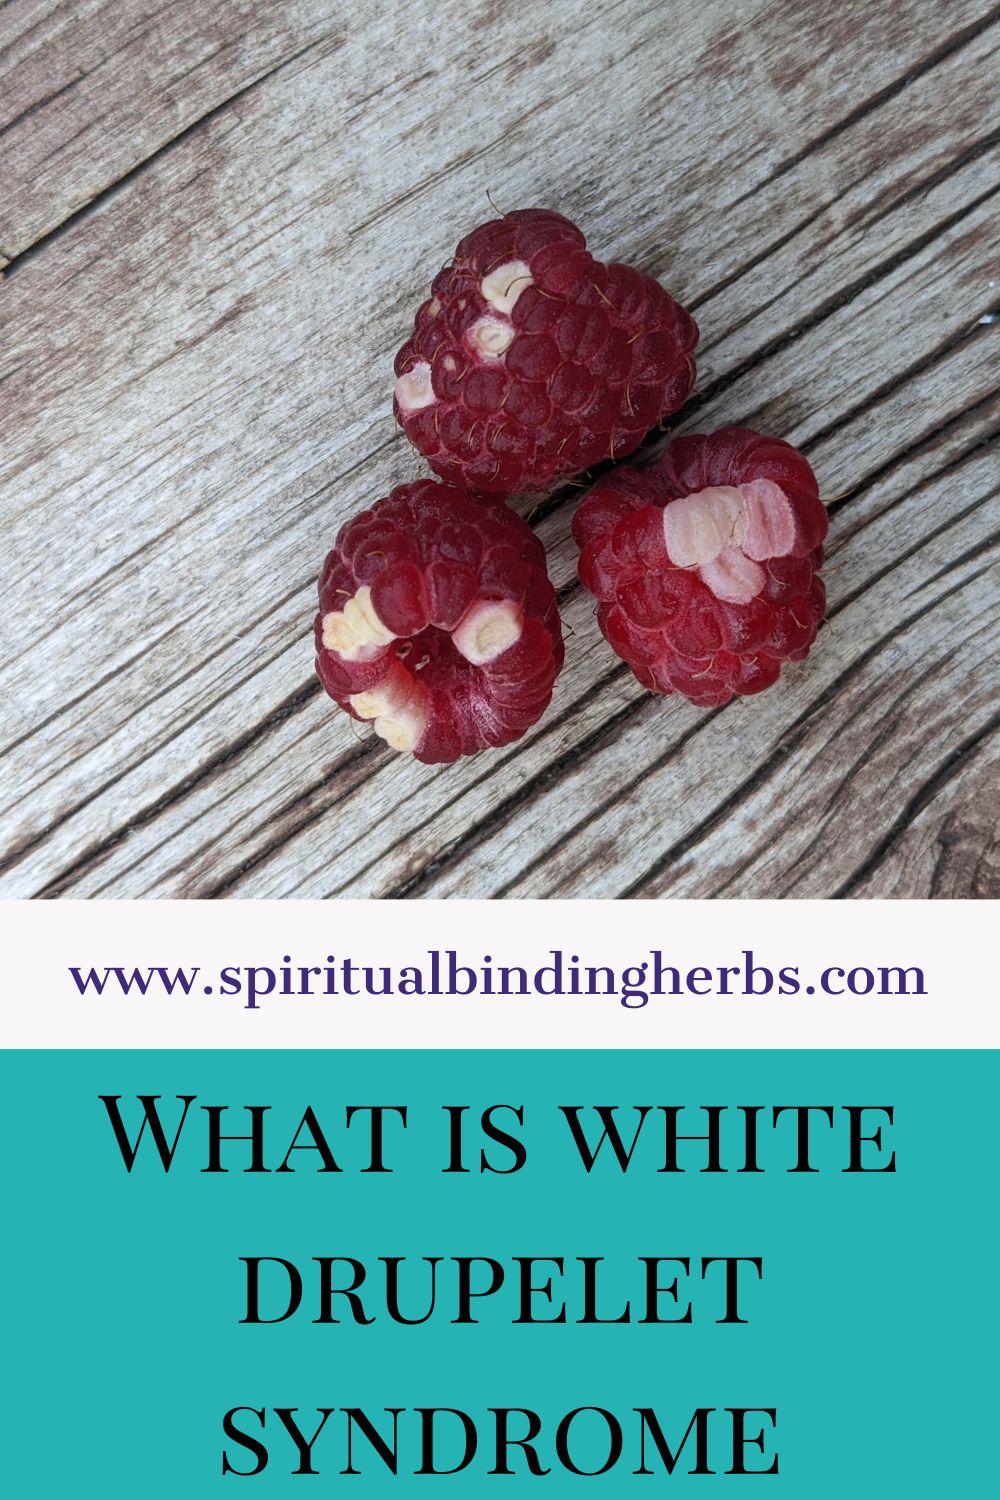 How To Know If Your Raspberries Have White Drupelet Syndrome